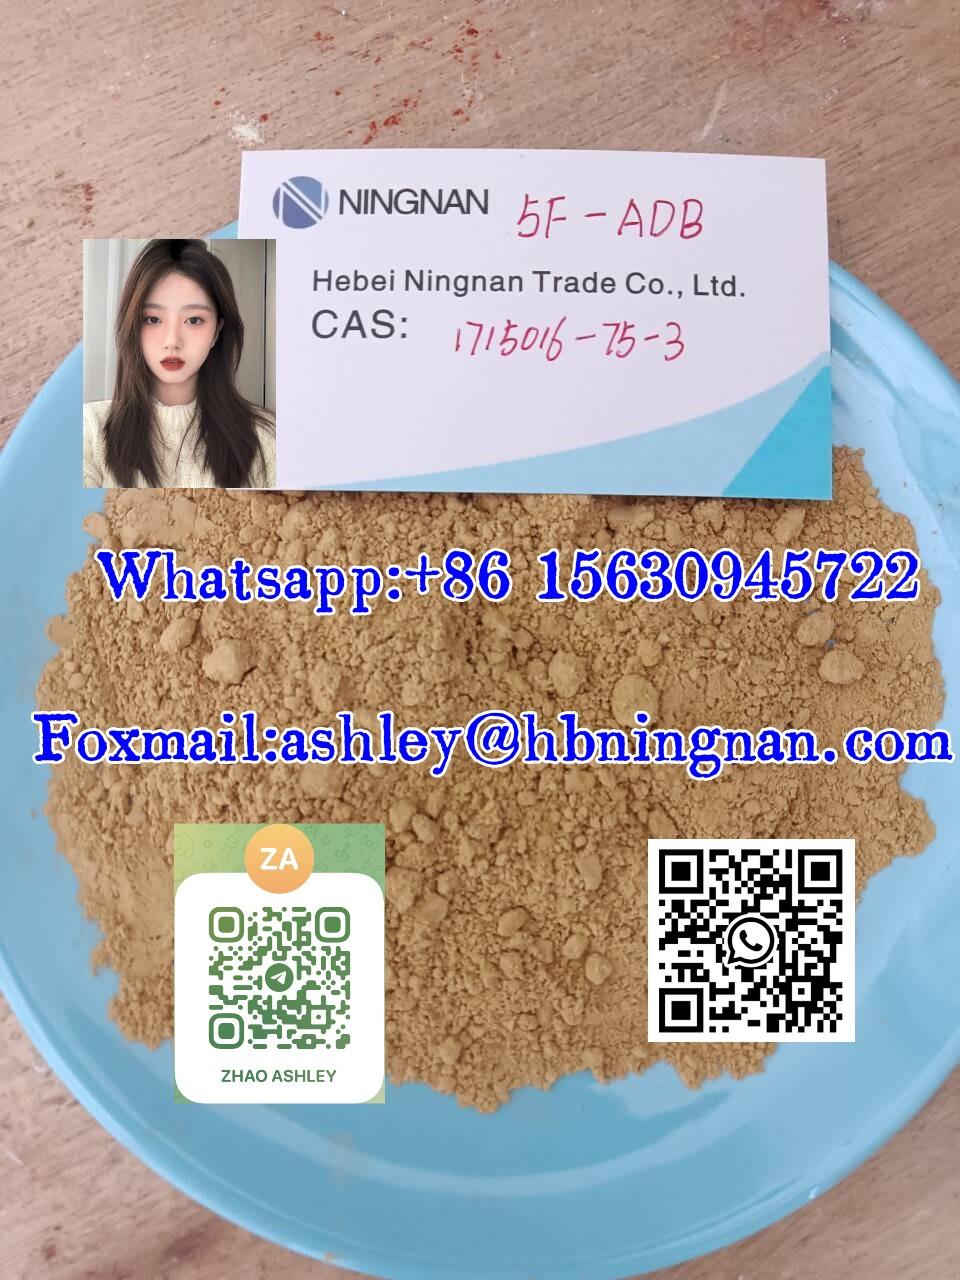  cas 1715016-75-3 5F-ADB 100% safe delivery!,1715016-75-3 5F-ADB,ningnan ,Construction and Decoration/Construction Machinery